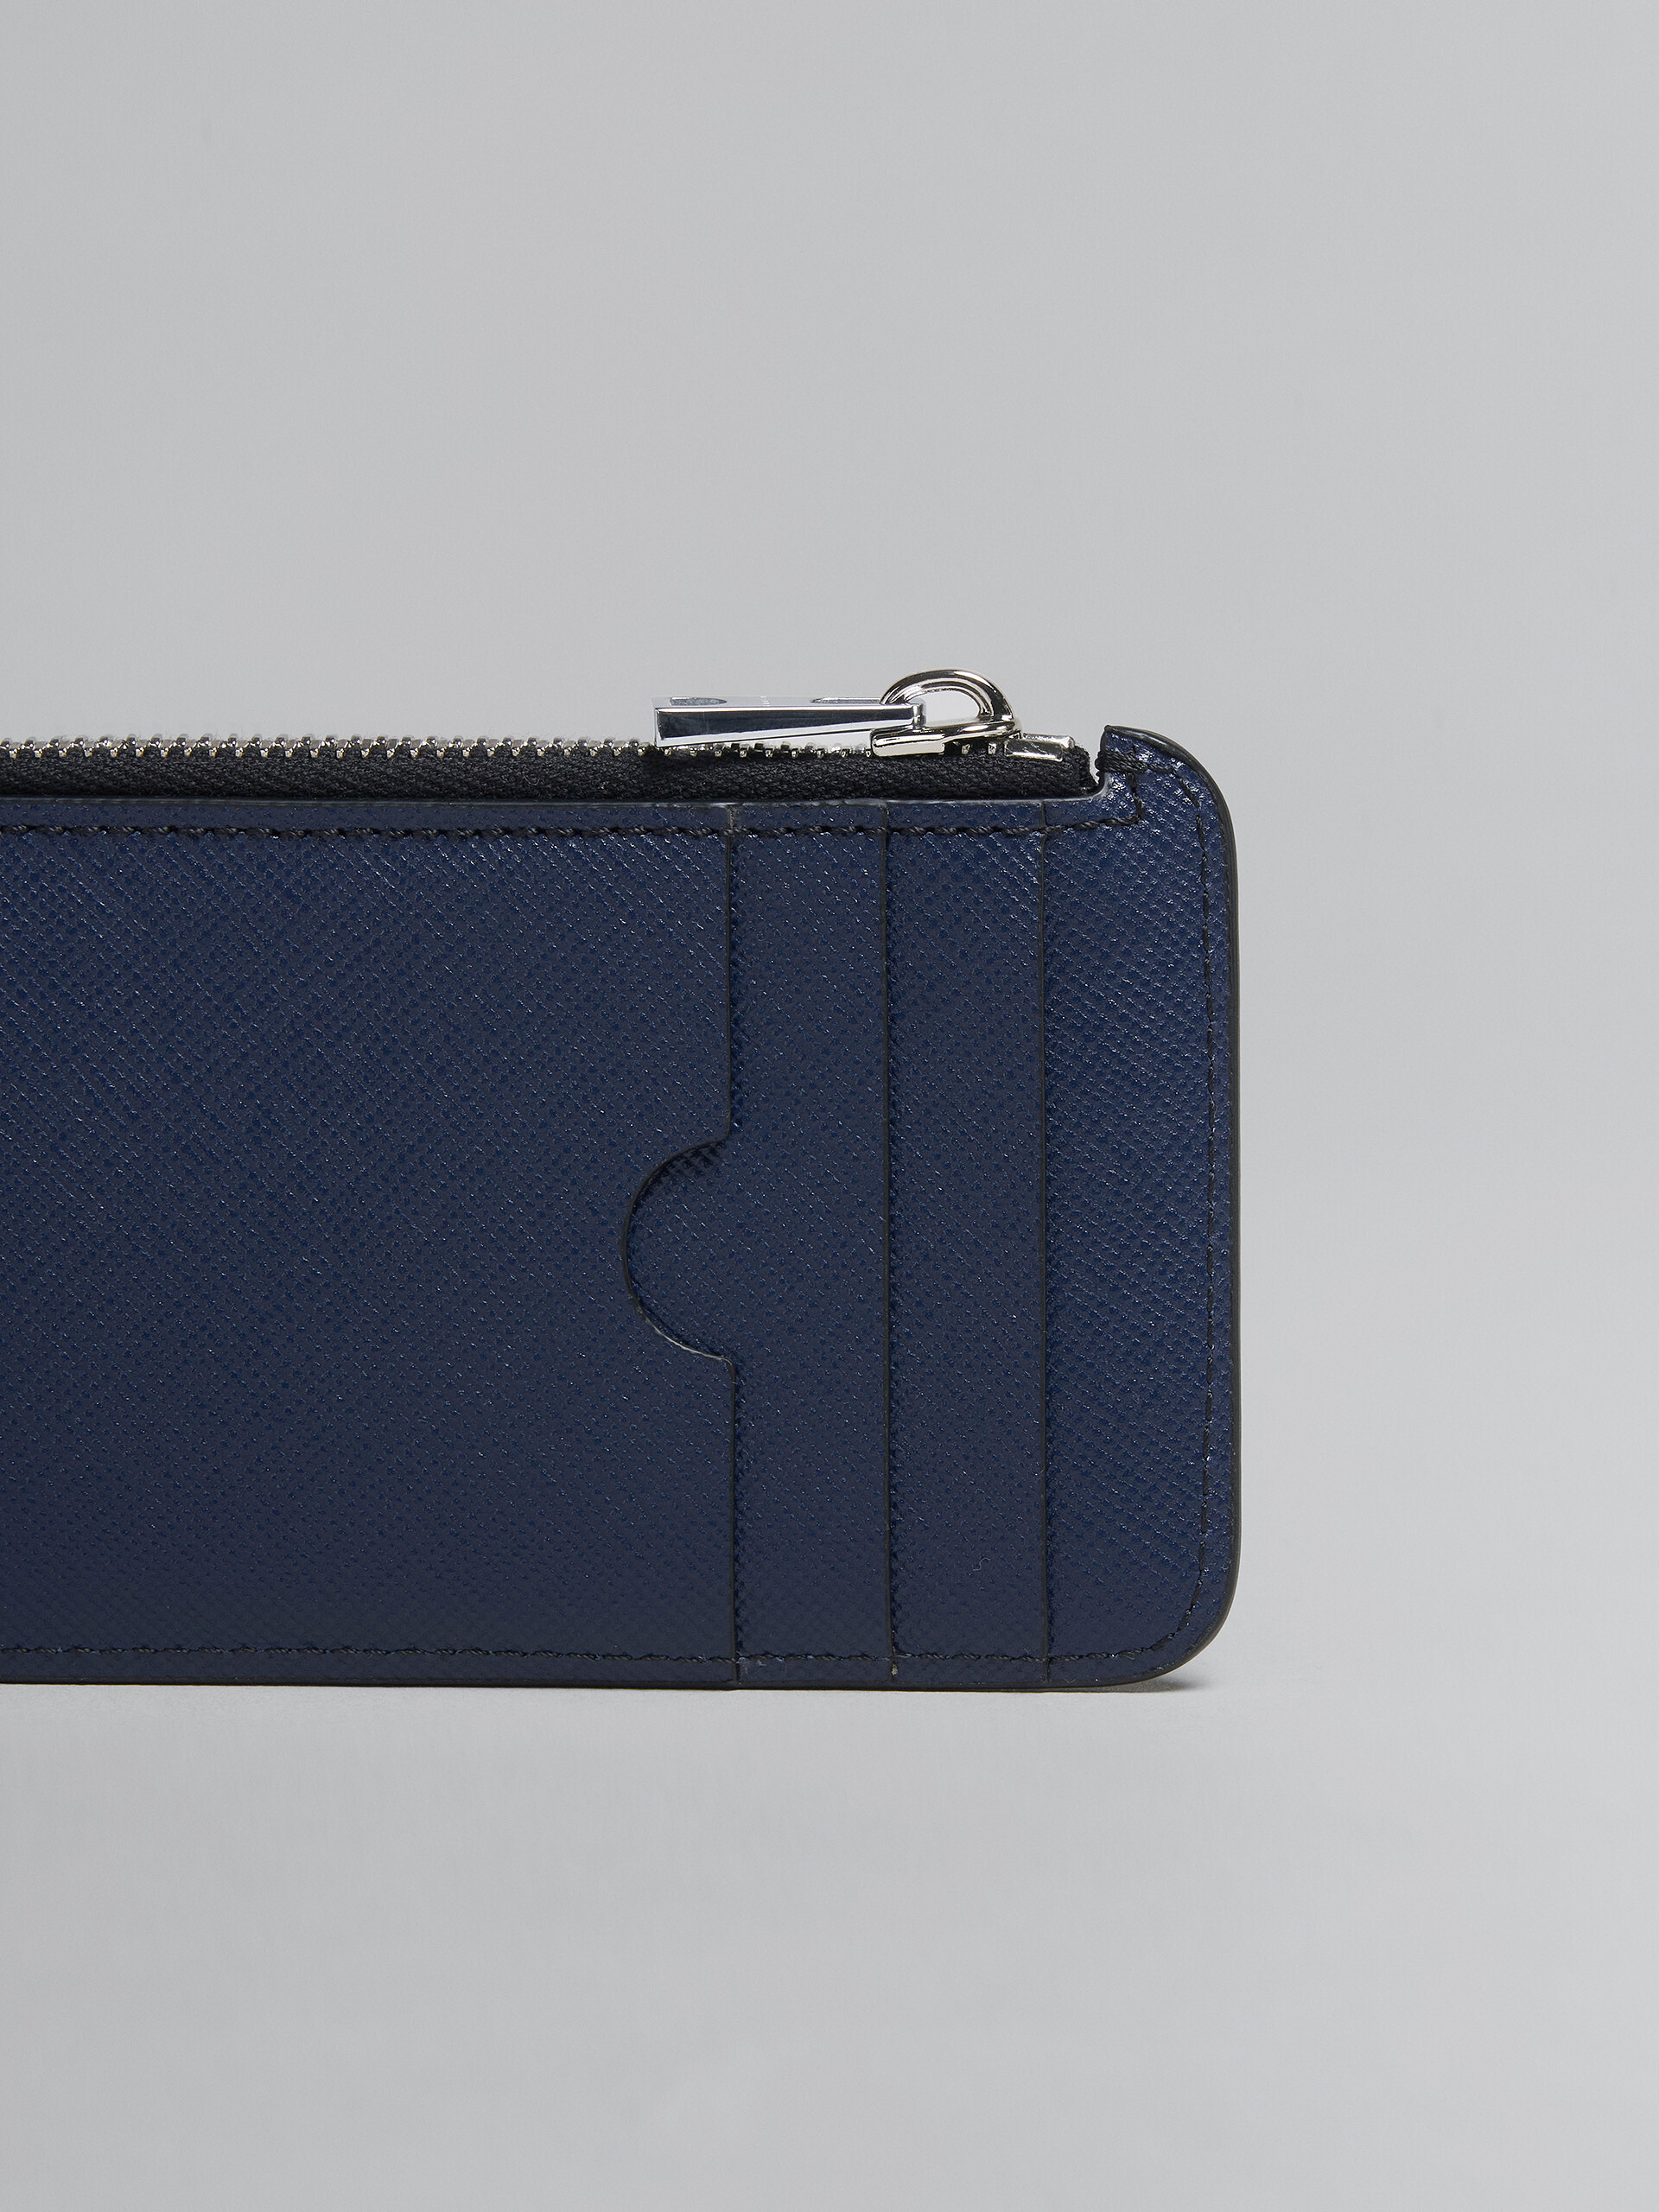 Grey and blue saffiano leather zip-around card case - Wallets - Image 4